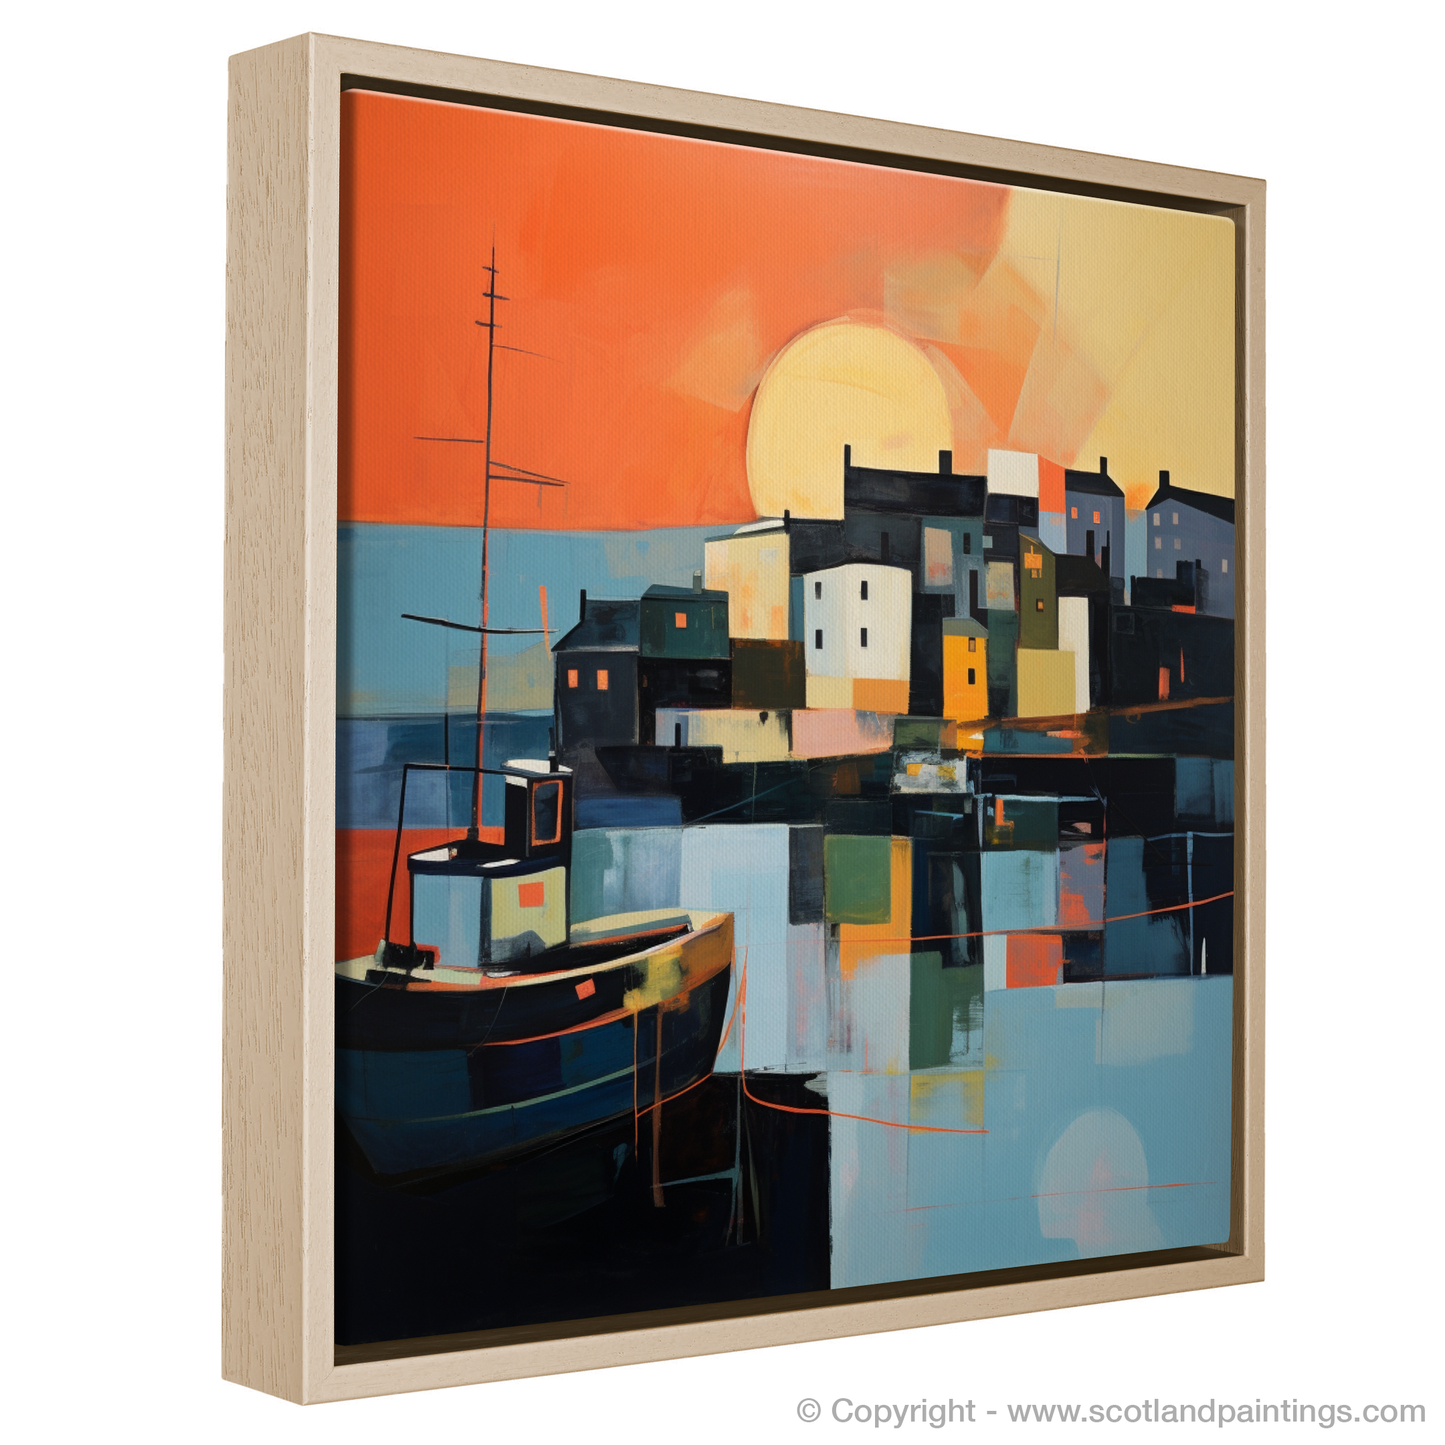 Stonehaven Harbour at Dusk: An Abstract Coastal Reverie